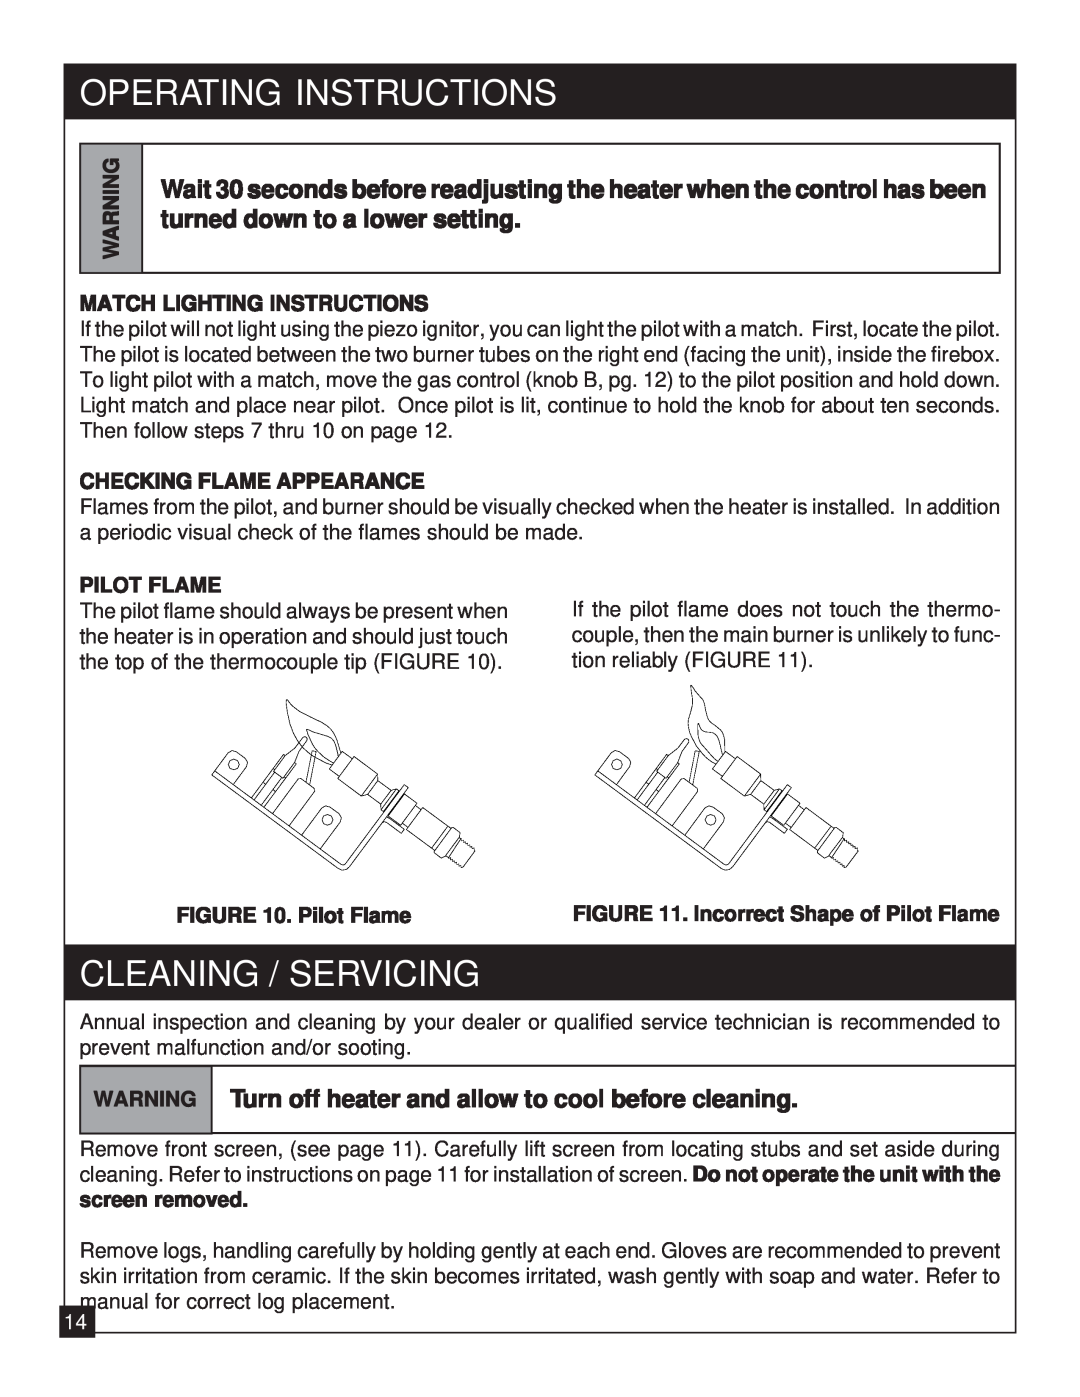 United States Stove 9947 Cleaning / Servicing, Turn off heater and allow to cool before cleaning, Operating Instructions 